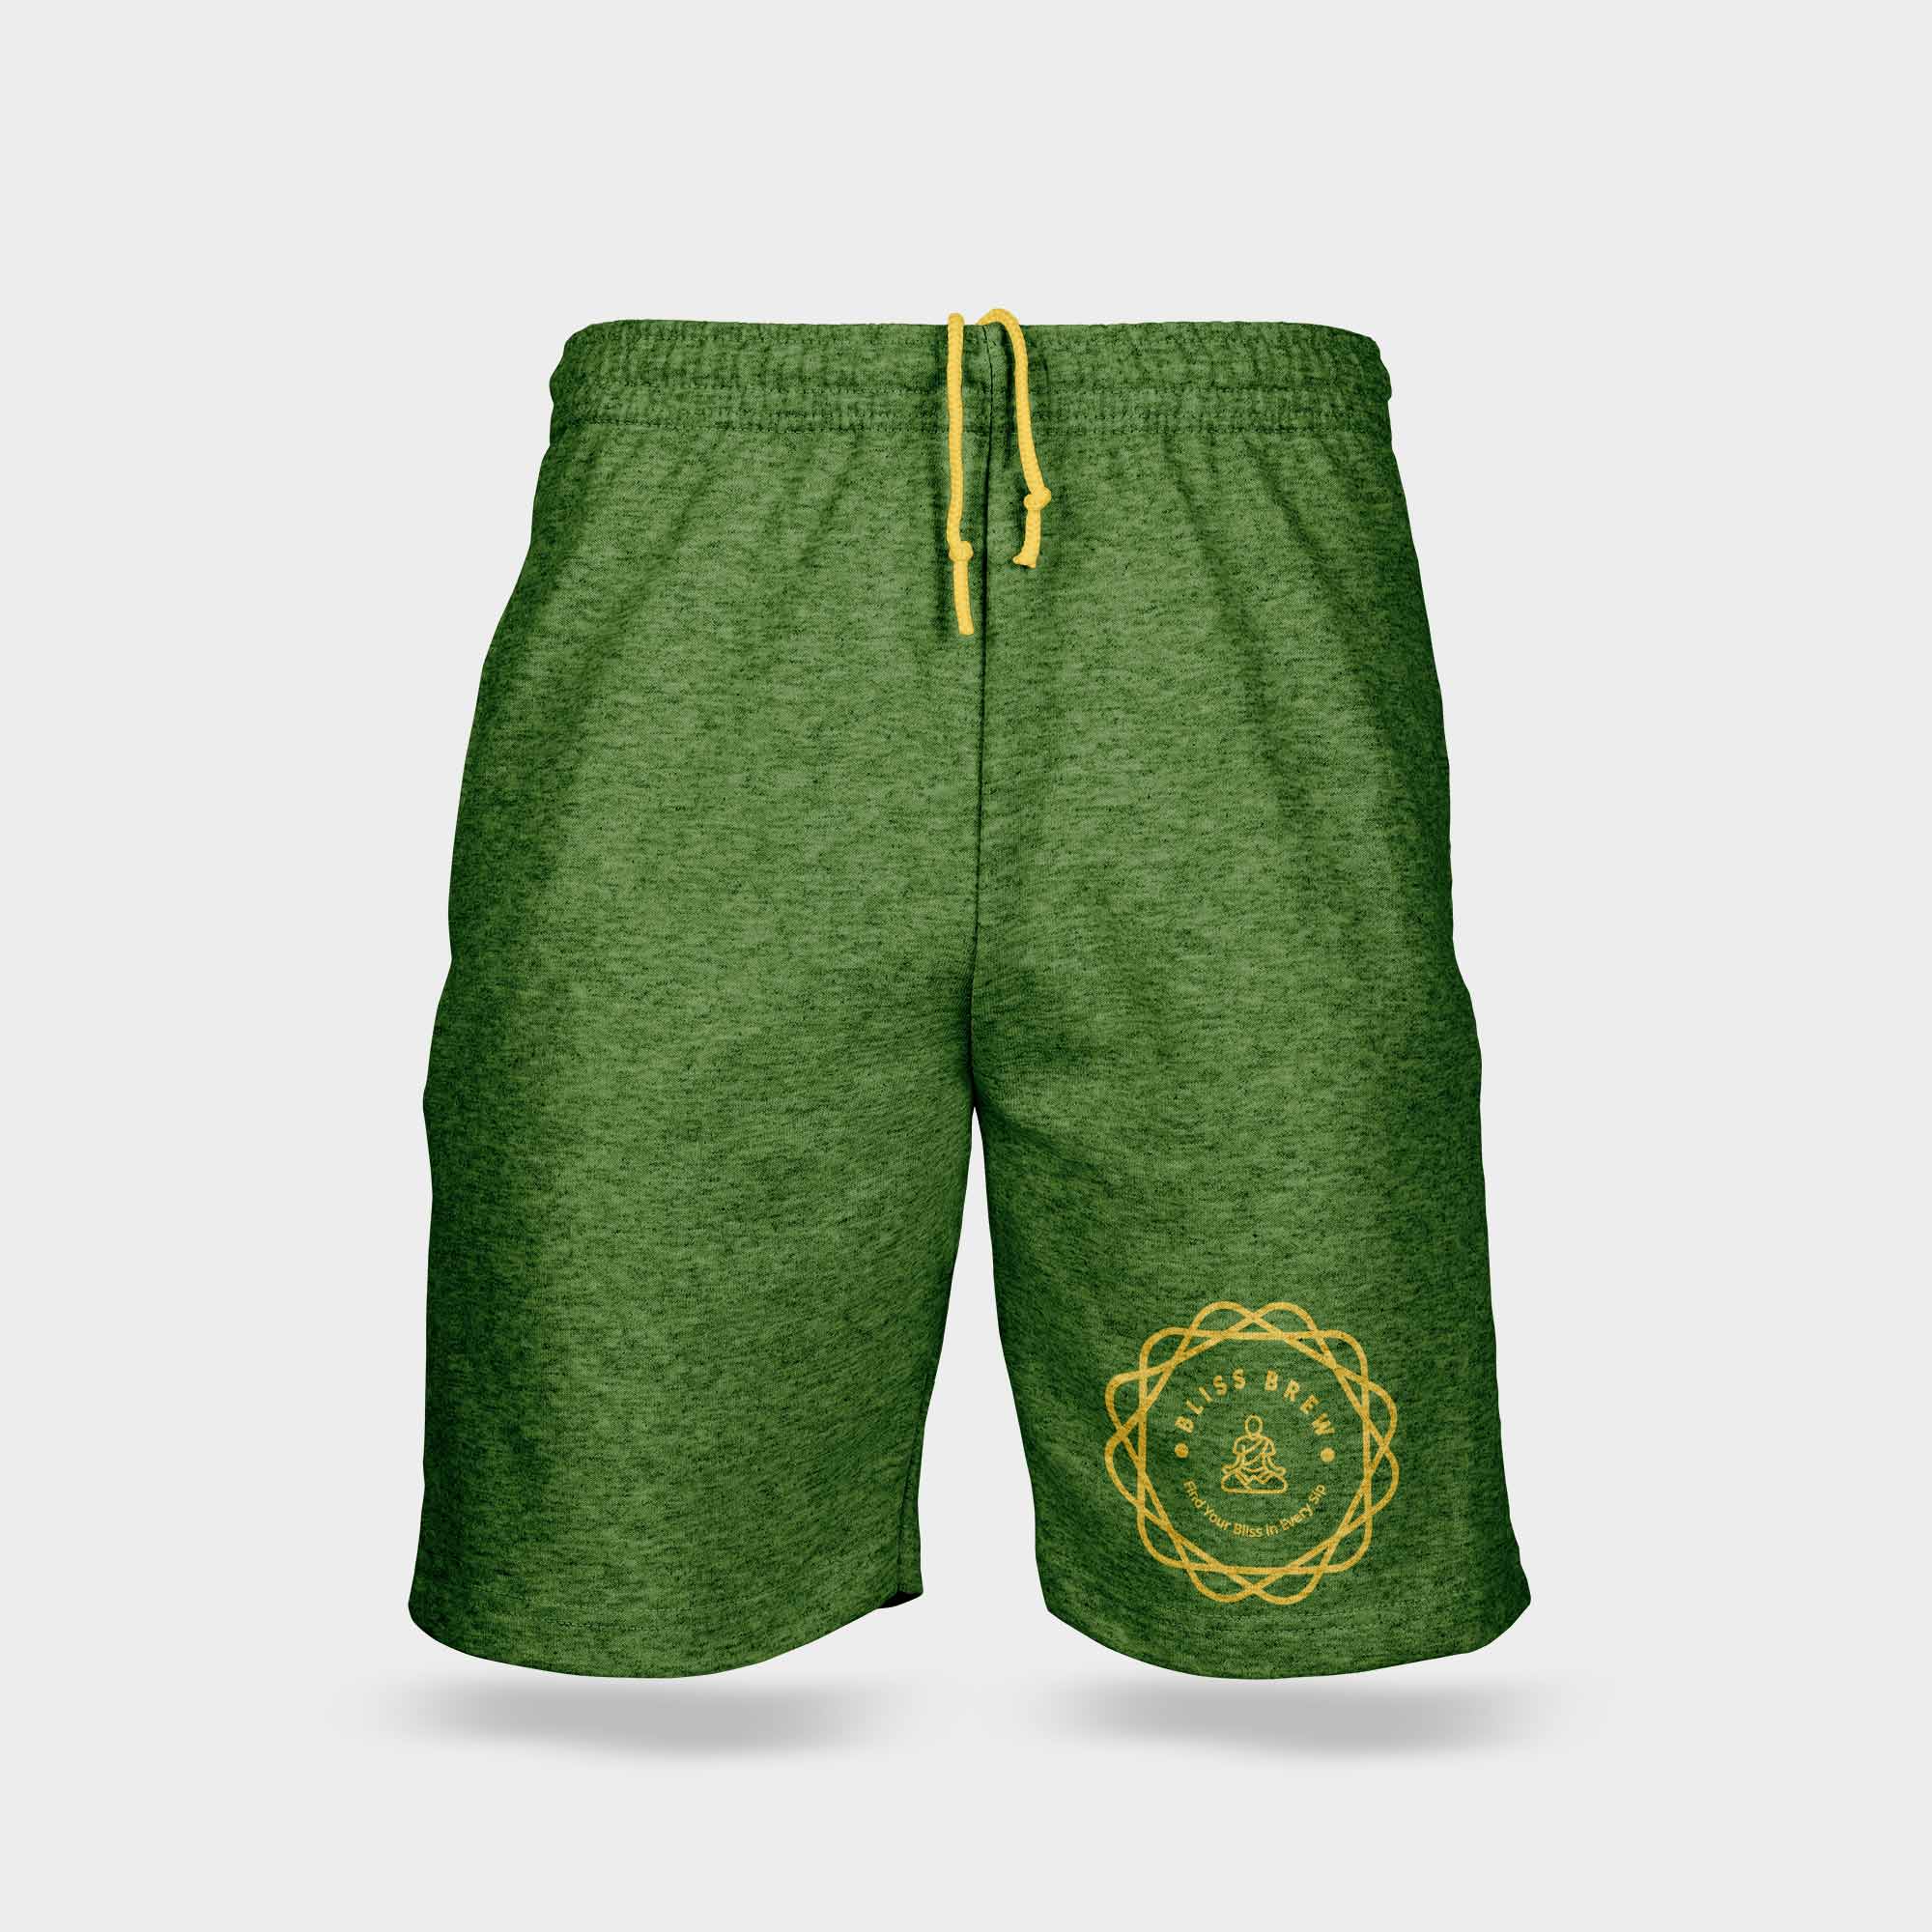 Green shorts with a yellow logo on them.